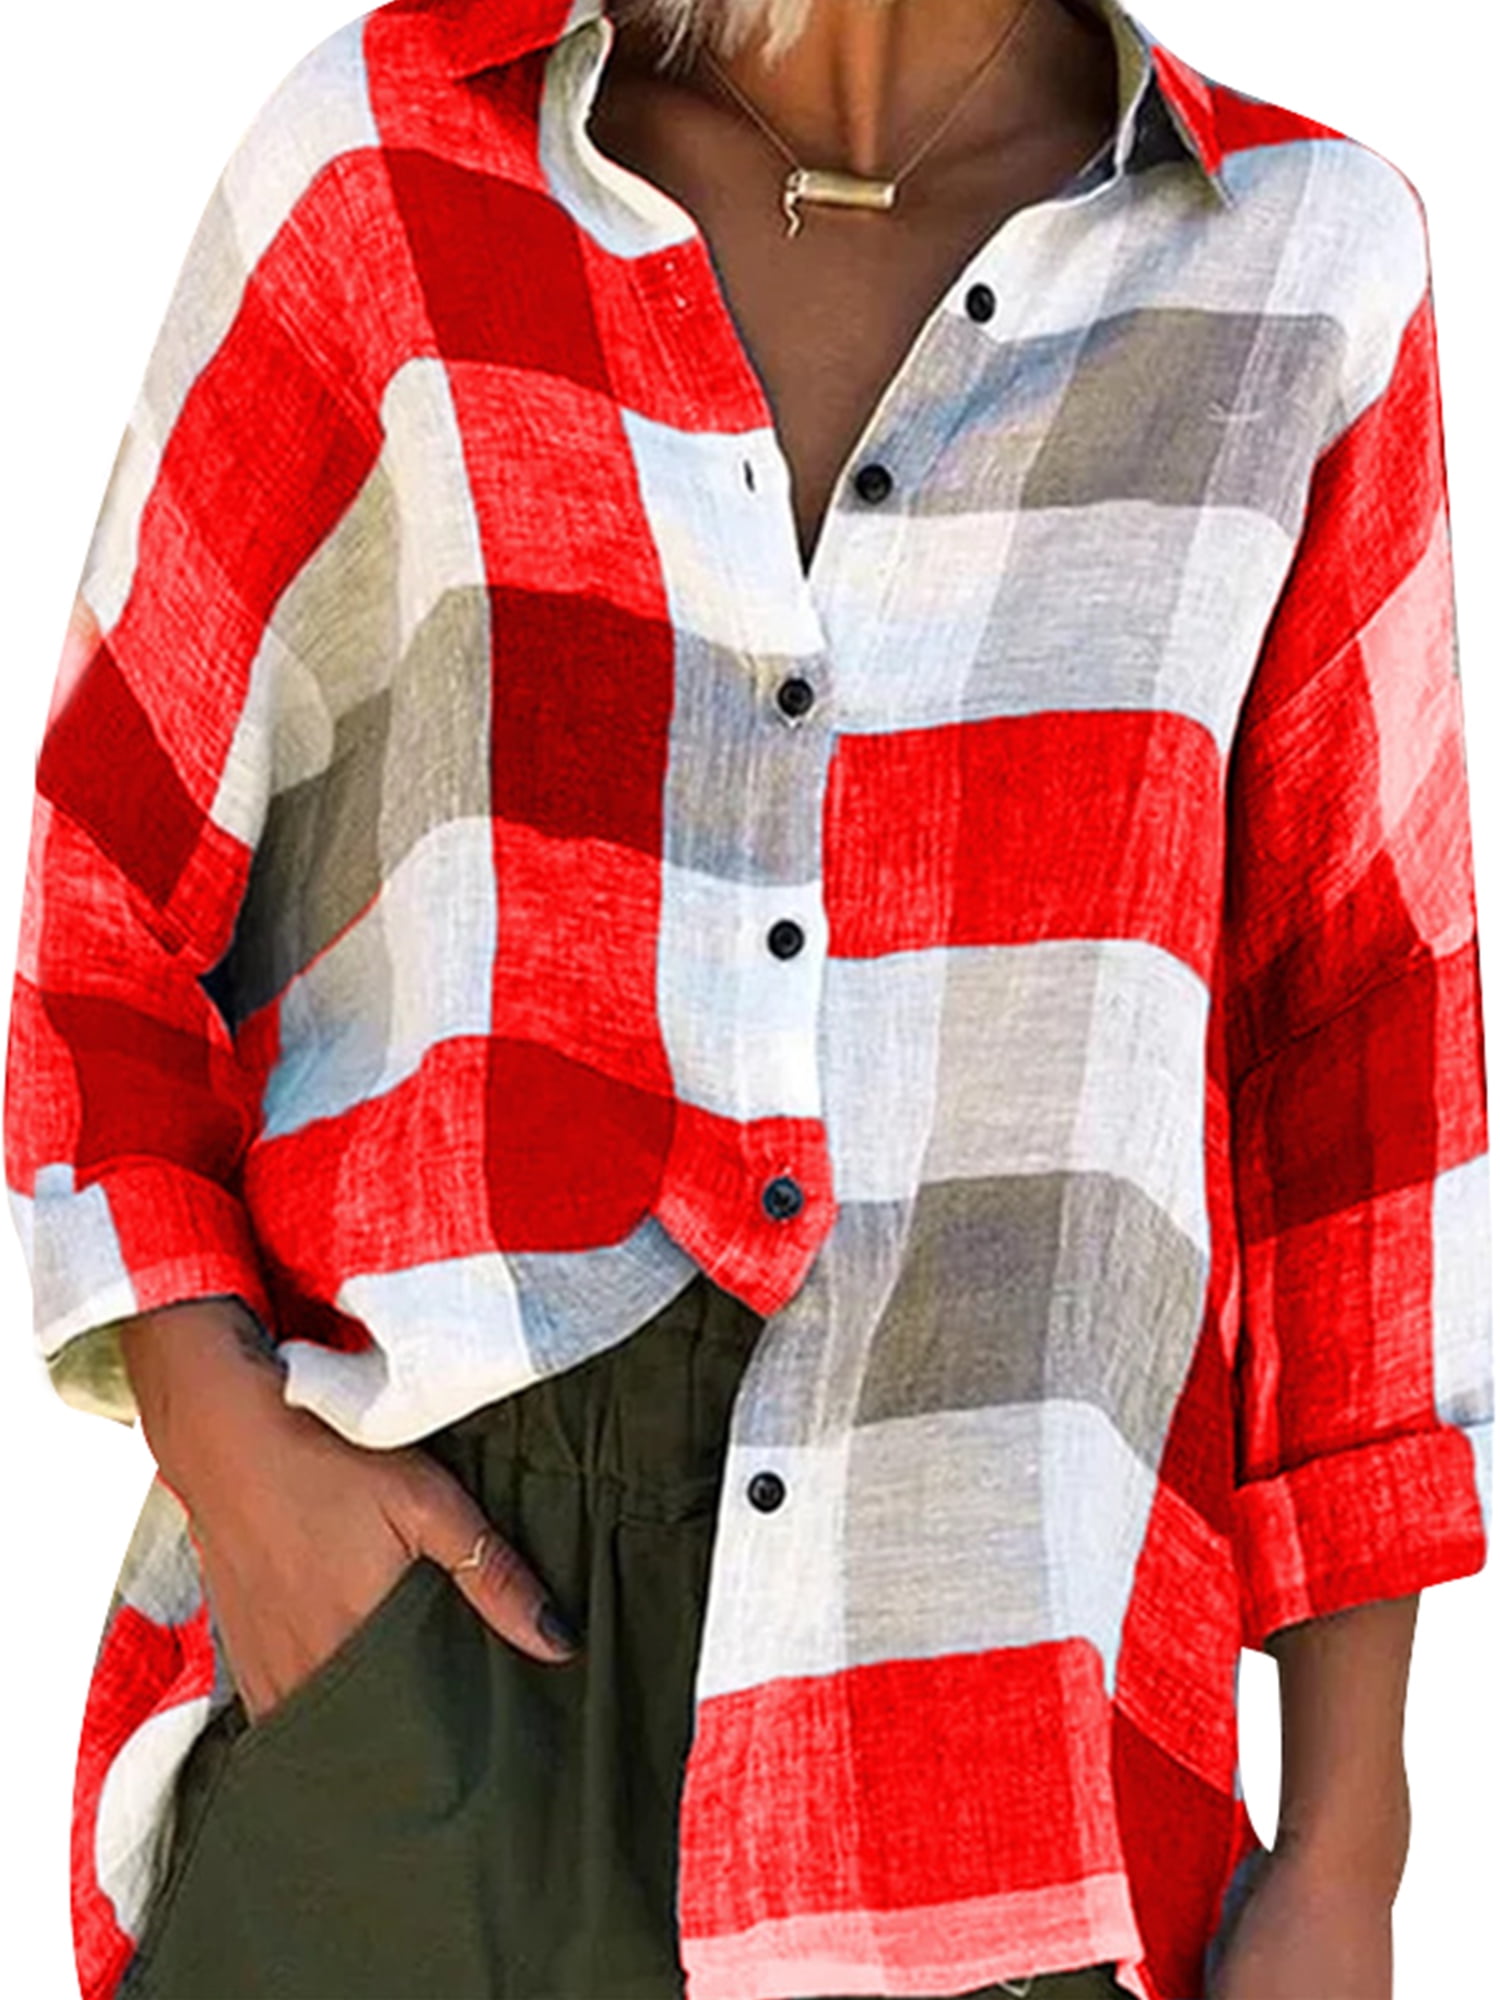 Eoeth Big Sale!Women Casual Plus Size O-Neck Printed Loose Button Tunic Shirt Blouse Tops Basic Simple Lightweight Tee 